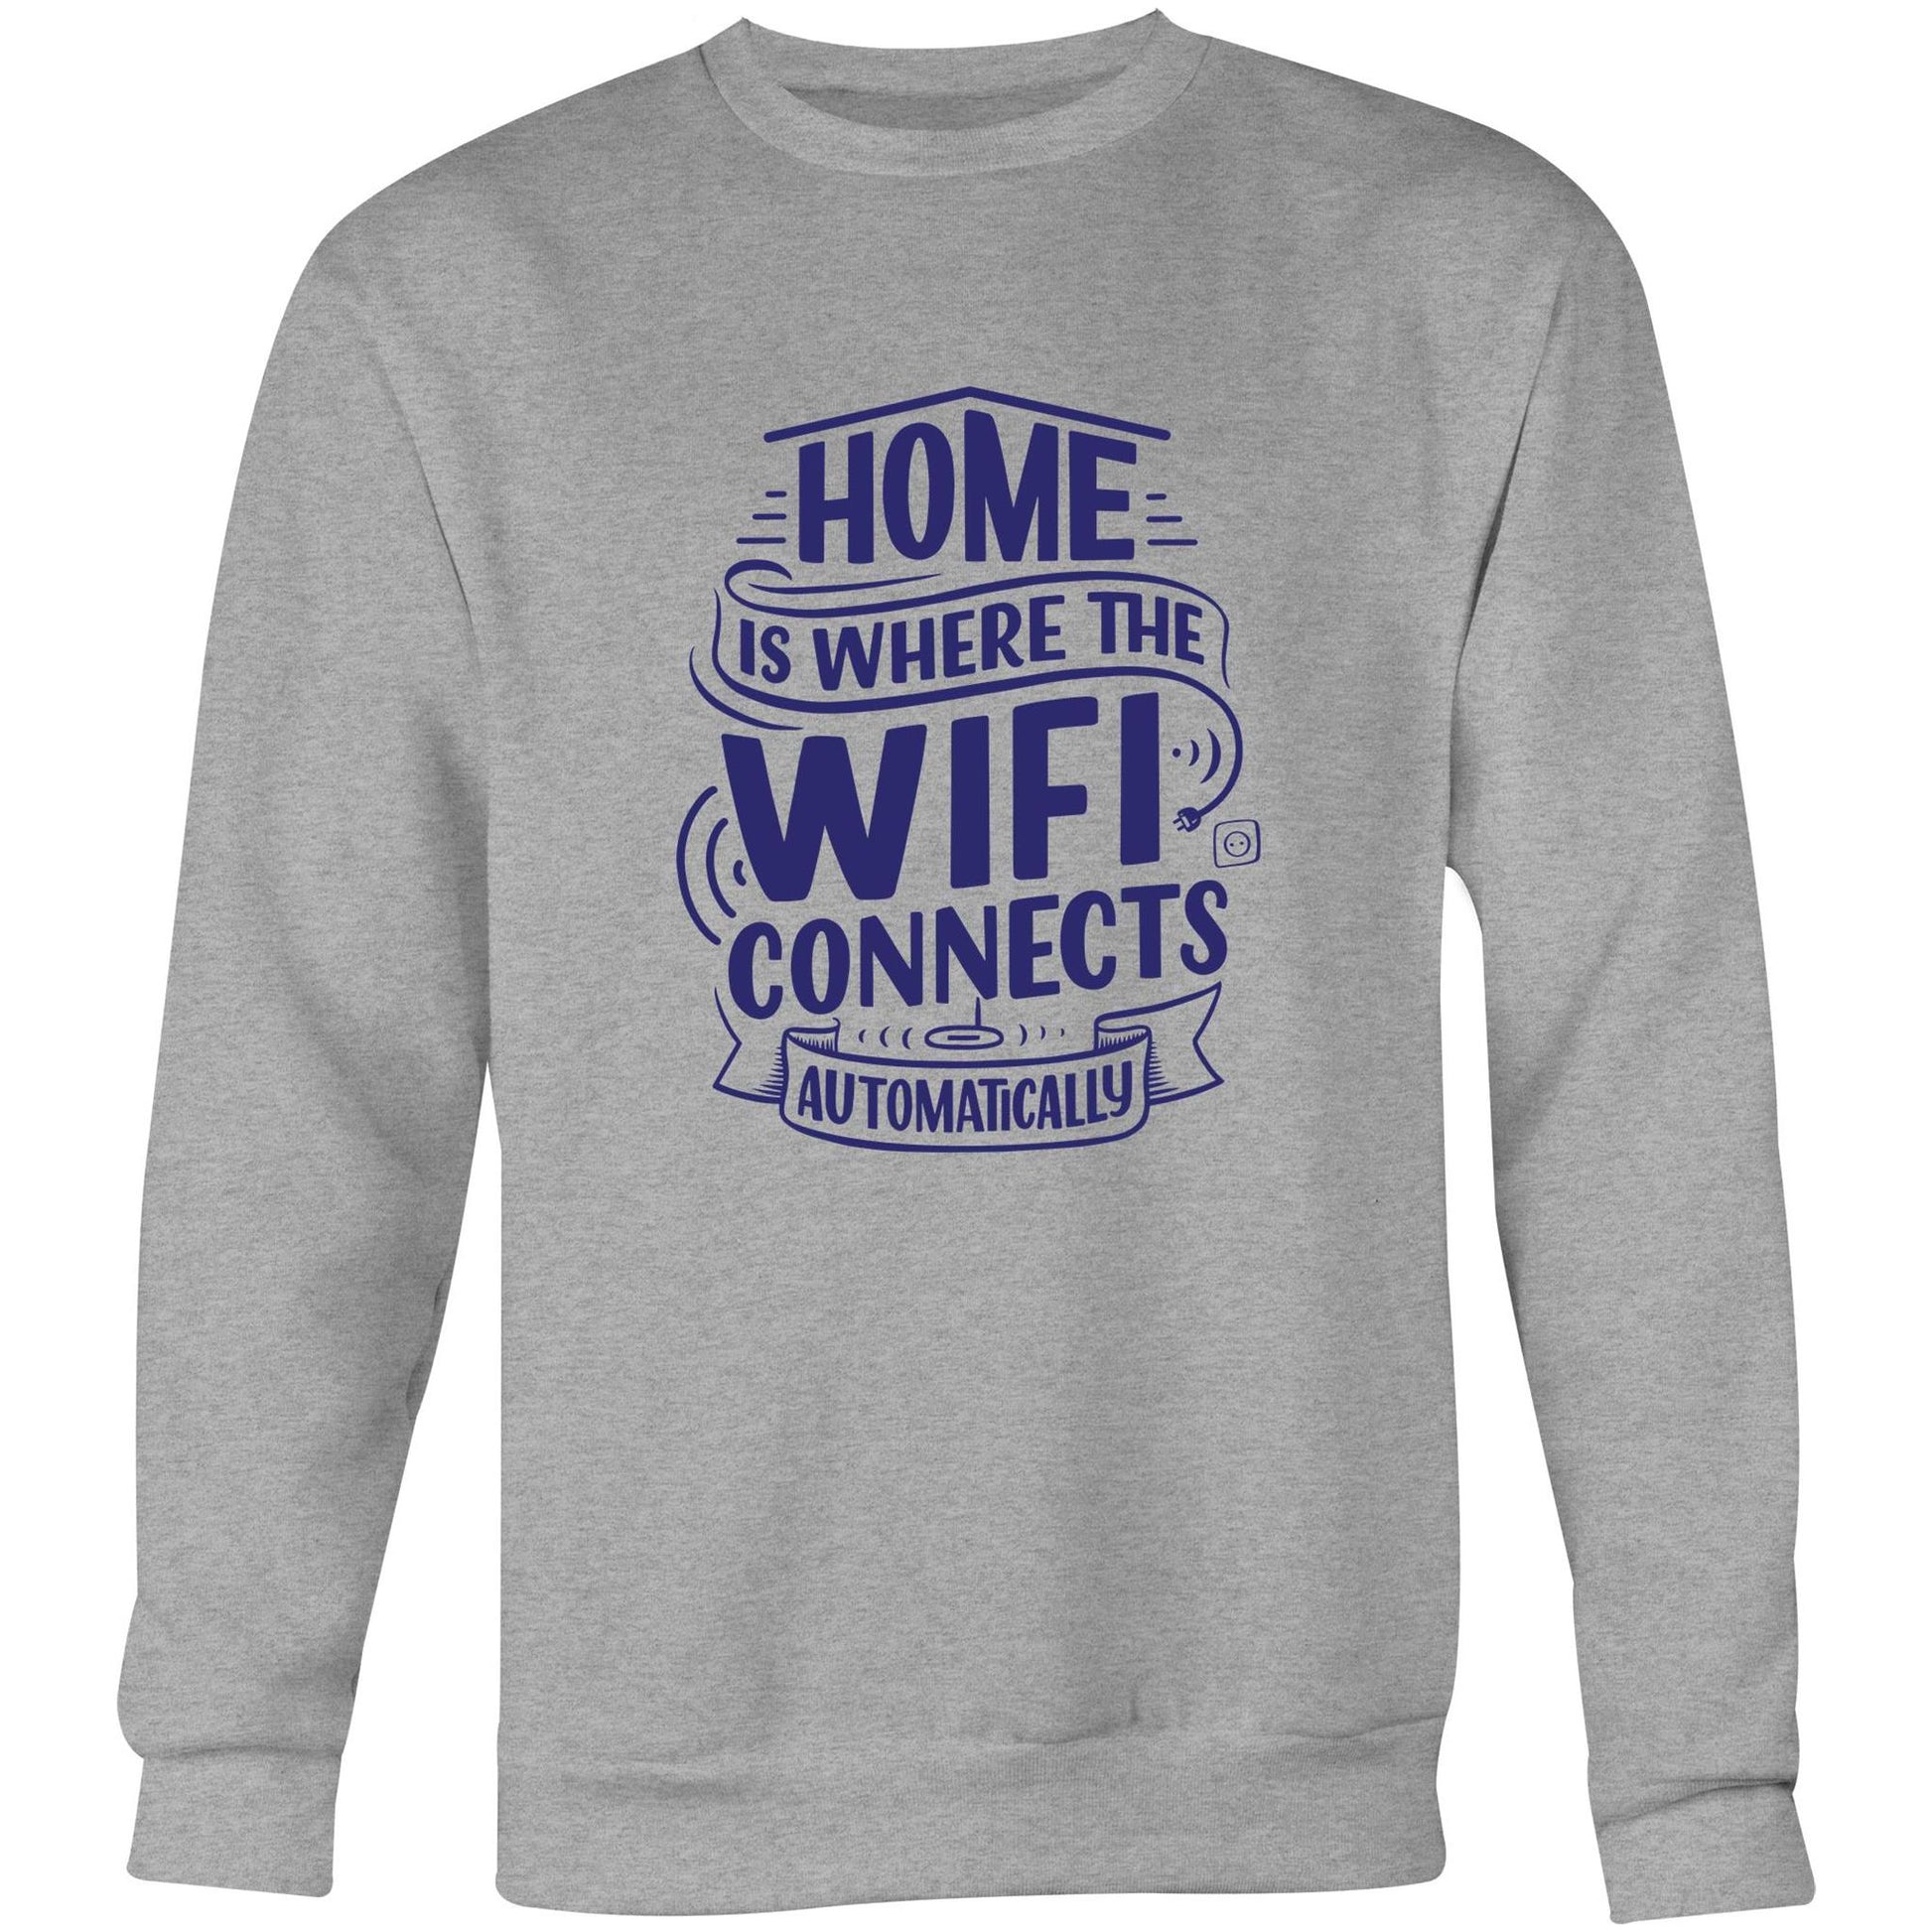 Home Is Where The WIFI Connects Automatically - Crew Sweatshirt Grey Marle Sweatshirt Tech